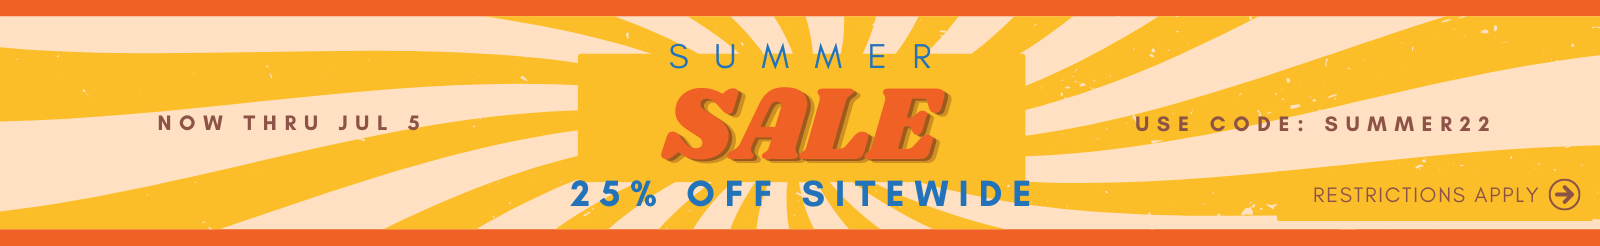 Slide of the summer sale - 25 percent off sitewide